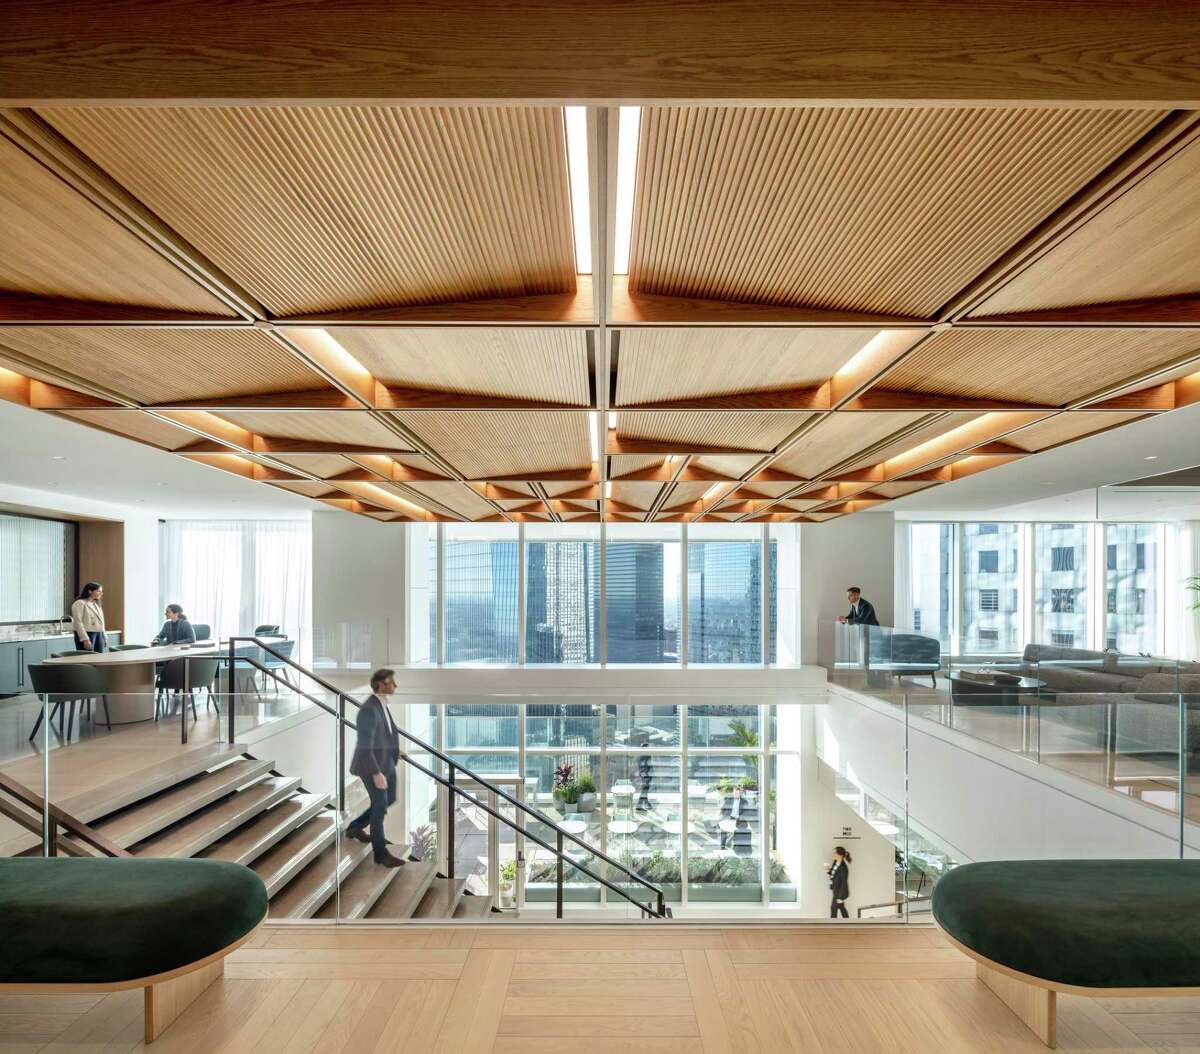 Hines' new headquarters in Texas Tower combine natural materials such as wood, glass and steel, and modern furnishings are found throughout.